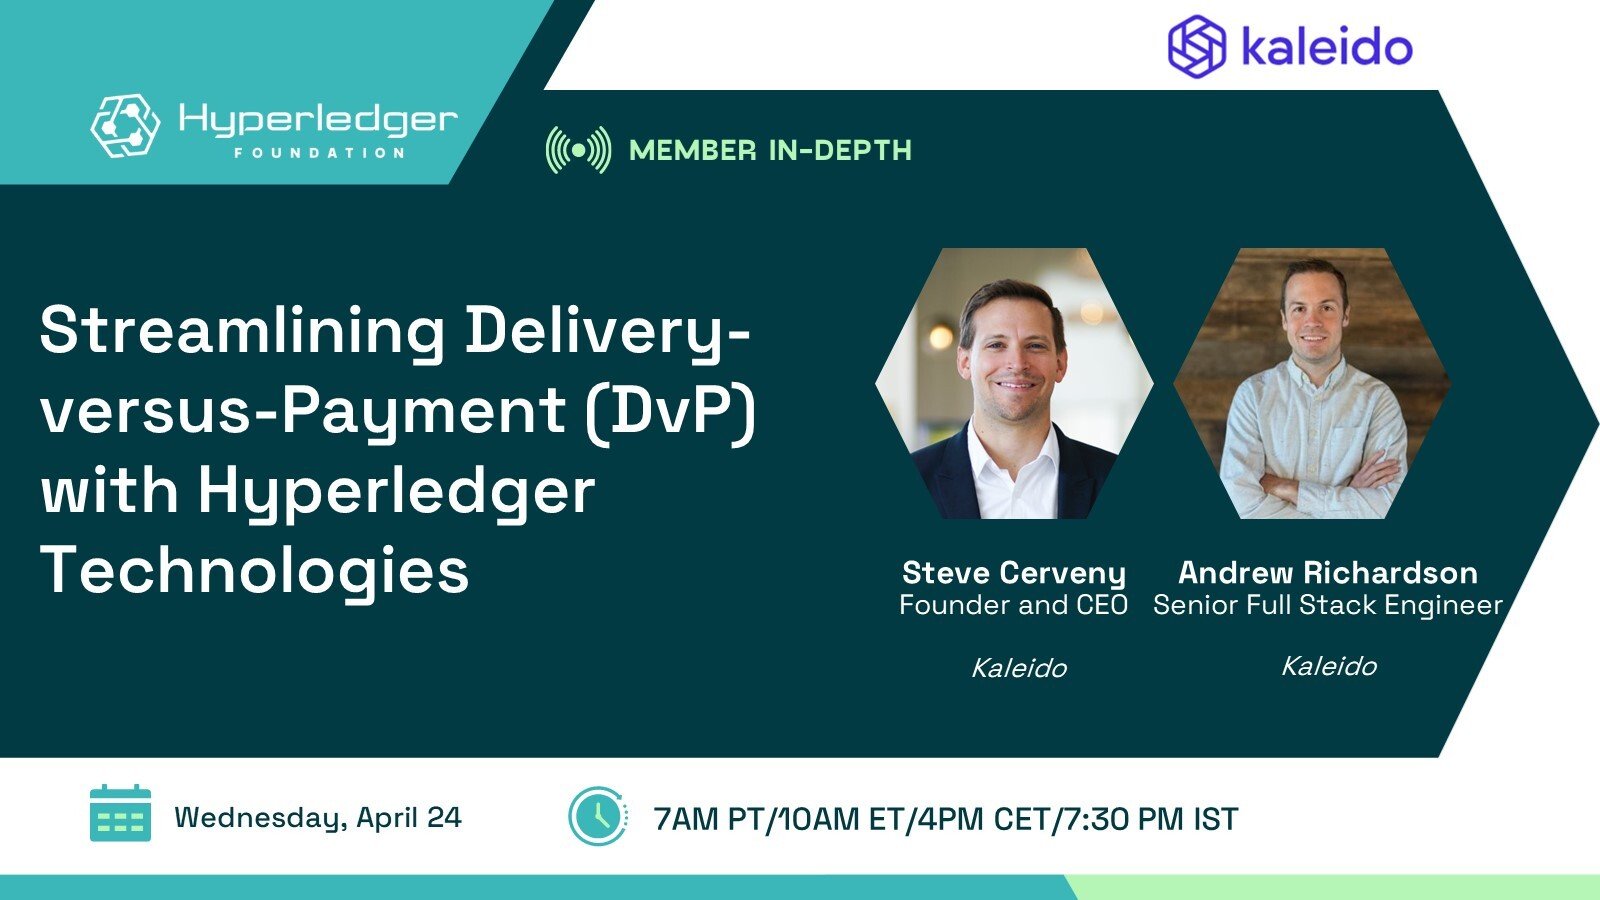 Hyperledger In-depth with Kaleido: Streamlining Delivery-versus-Payment (DvP) with Hyperledger Technologies featured image